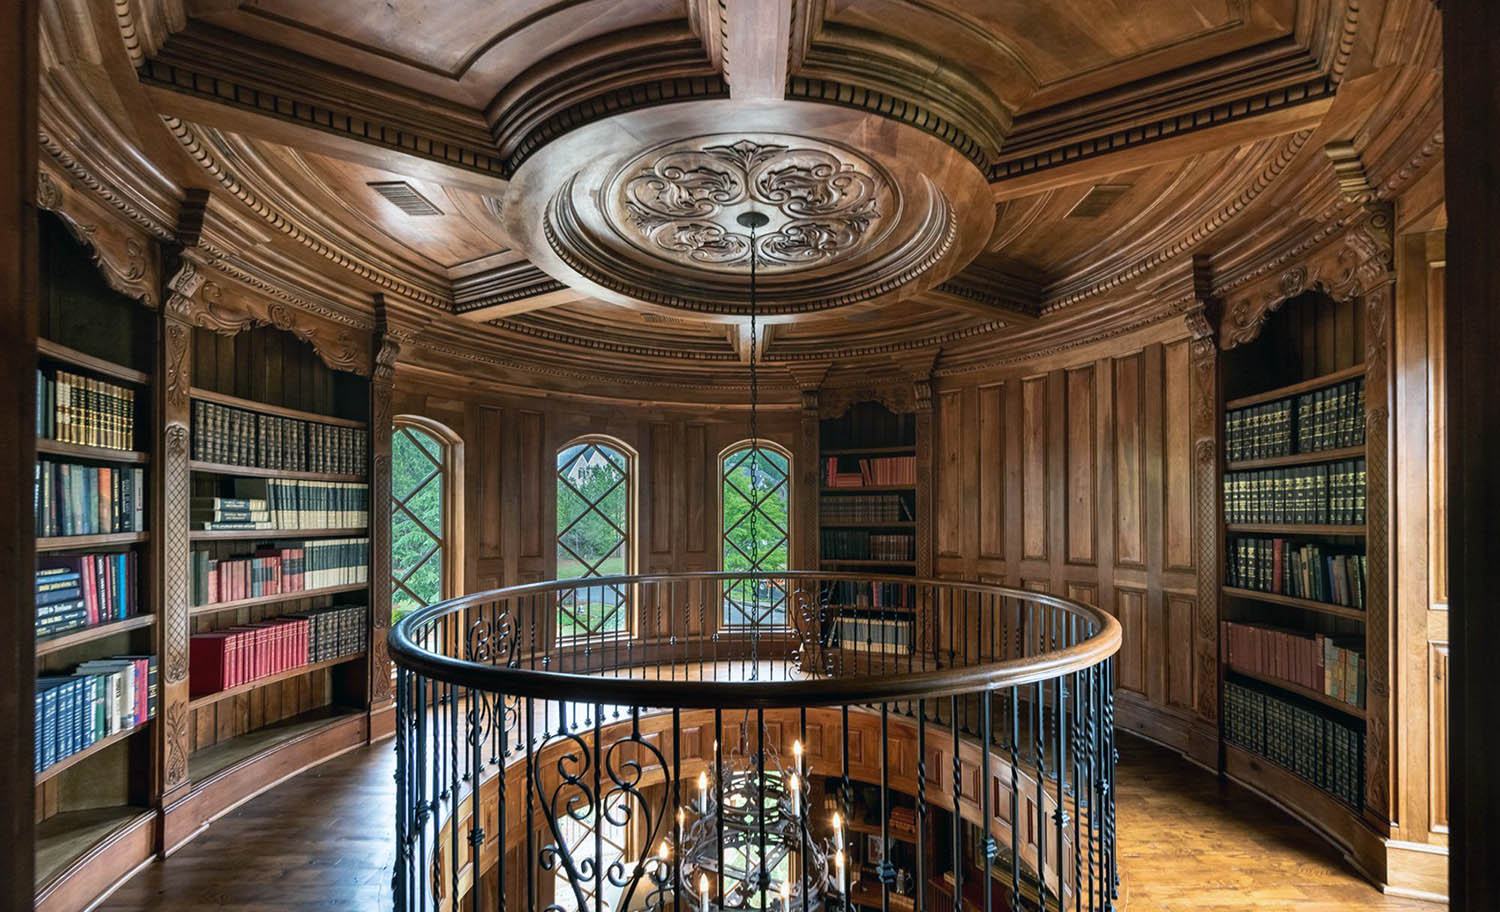 Beautiful round home library with all wood walls and coffred ceiling.